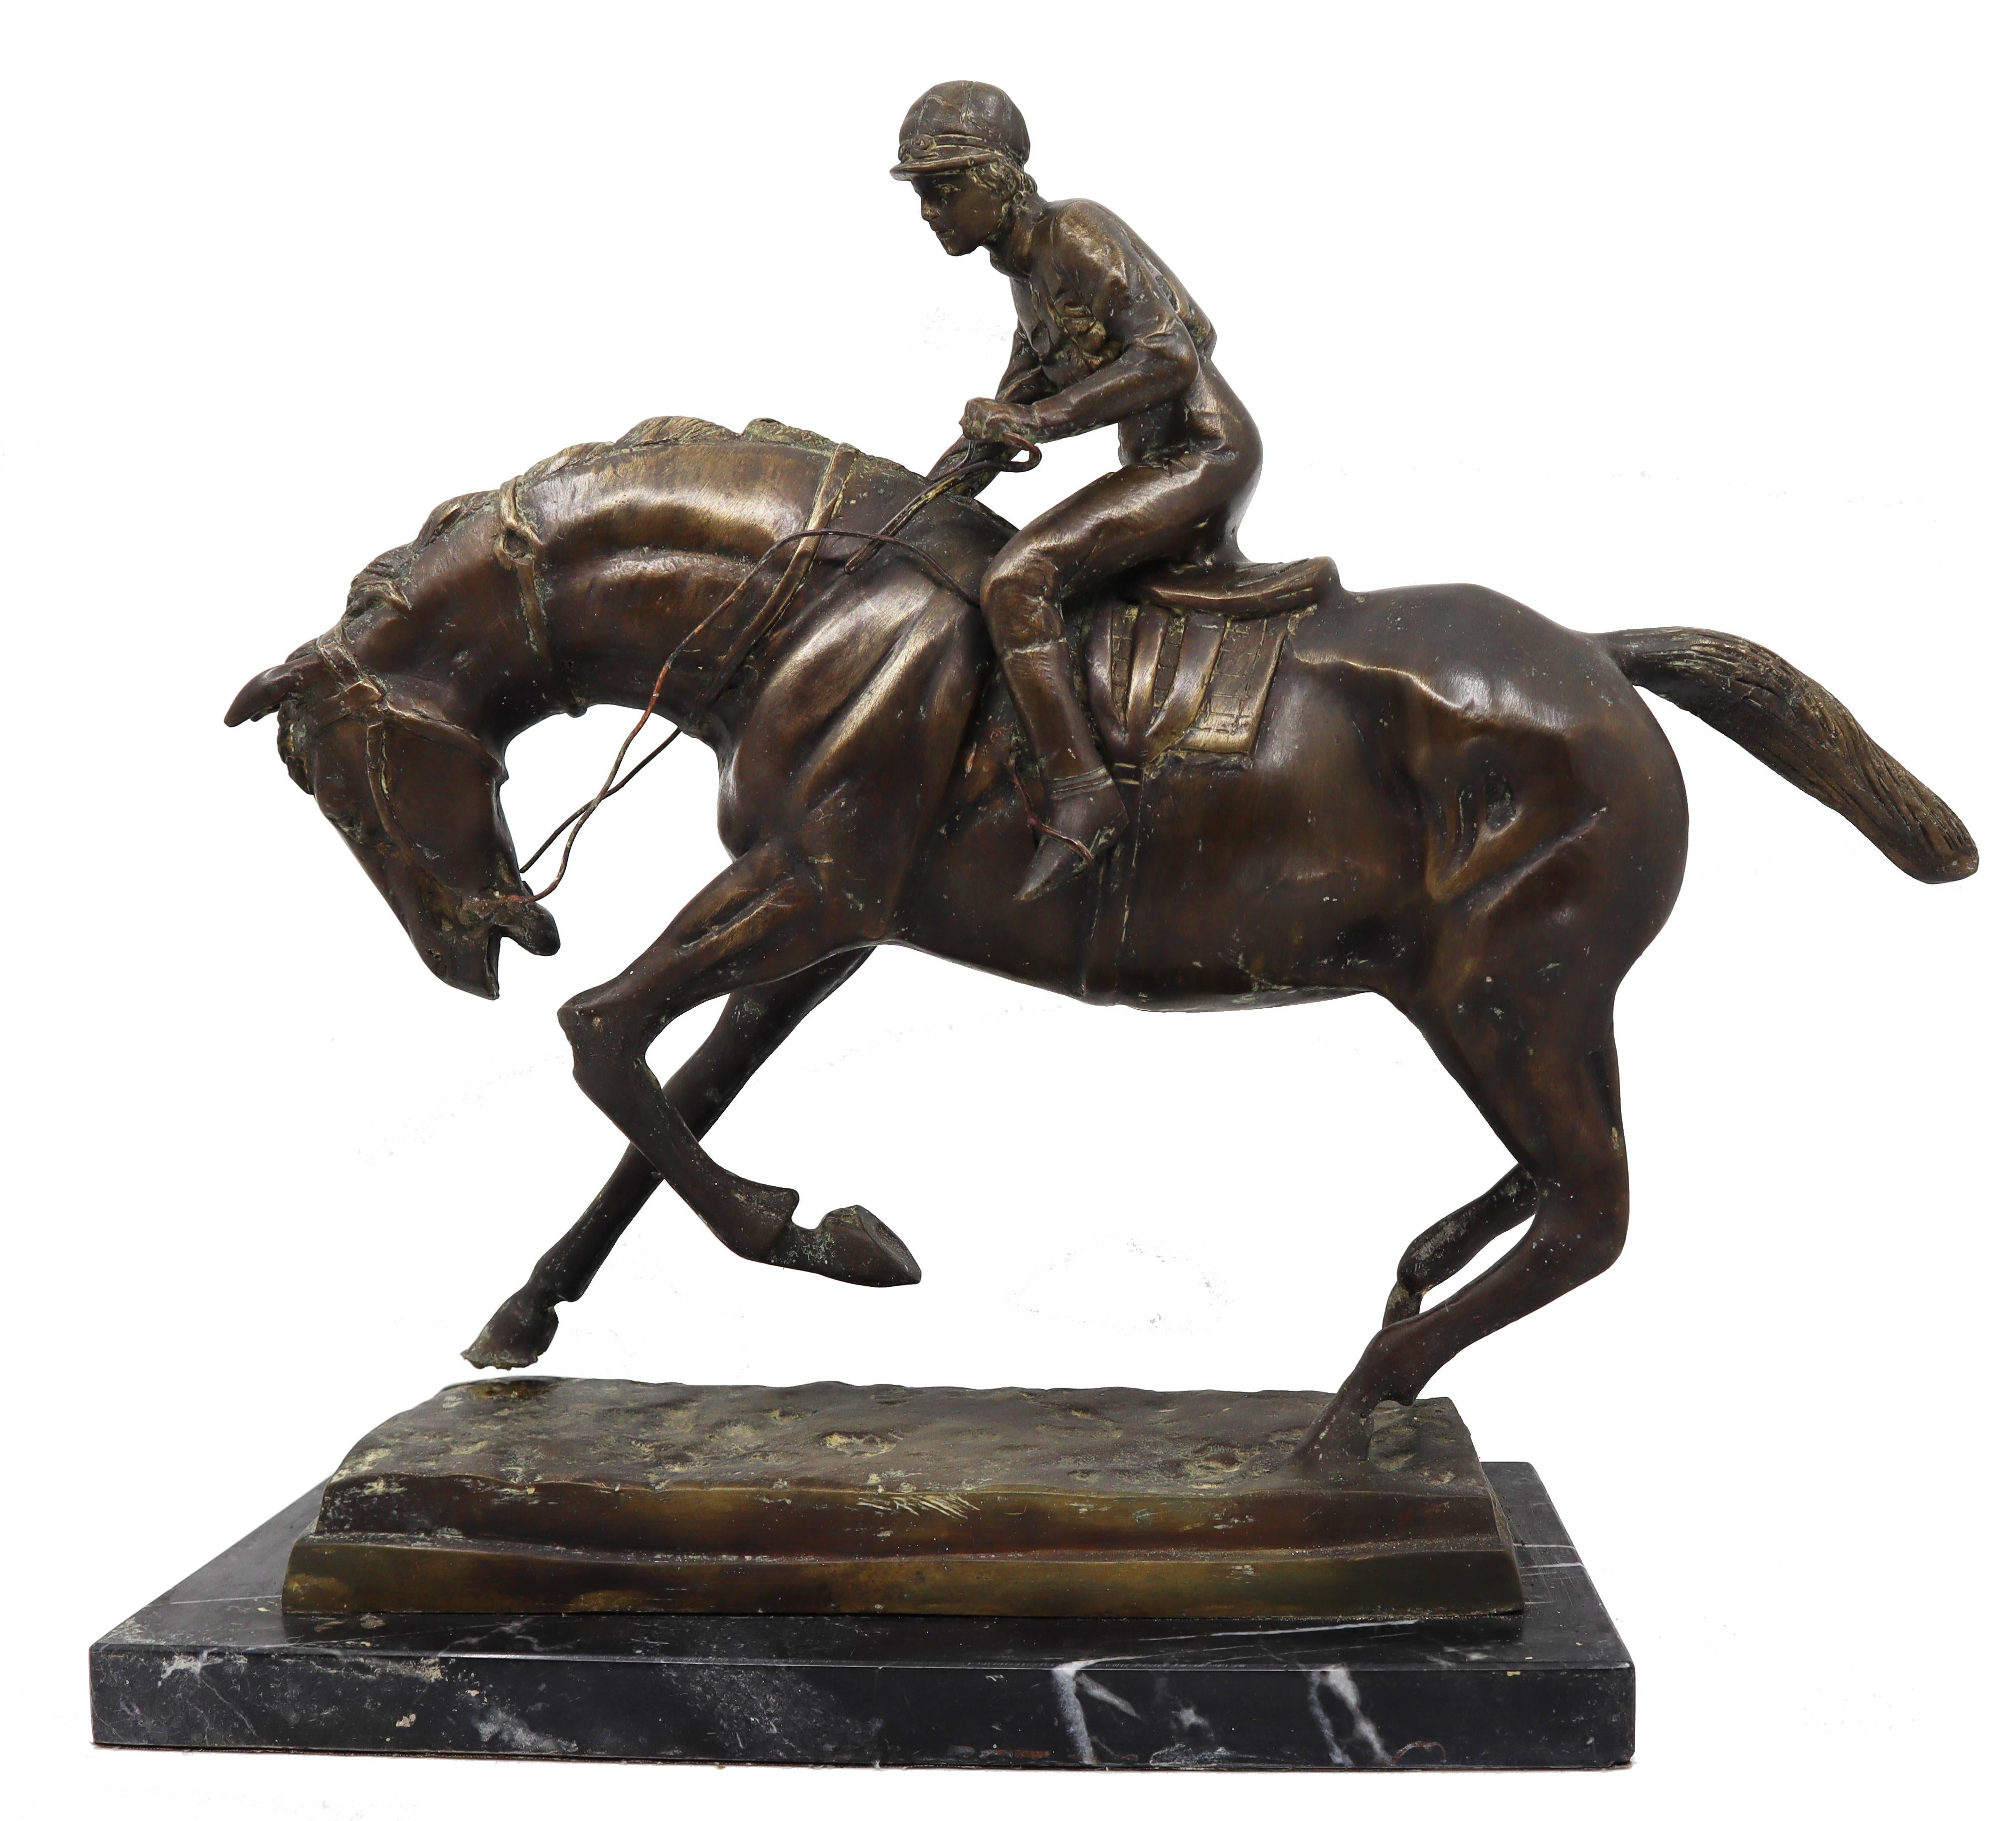 A bronze equestrian statue of a Jockey on his horse beautiful captured movement

The statue is in excellent condition.
Dimension:
Height 33cm x width 38cm x 14 cm 

Shipping included
Free and fast delivery door to door by air
Original art